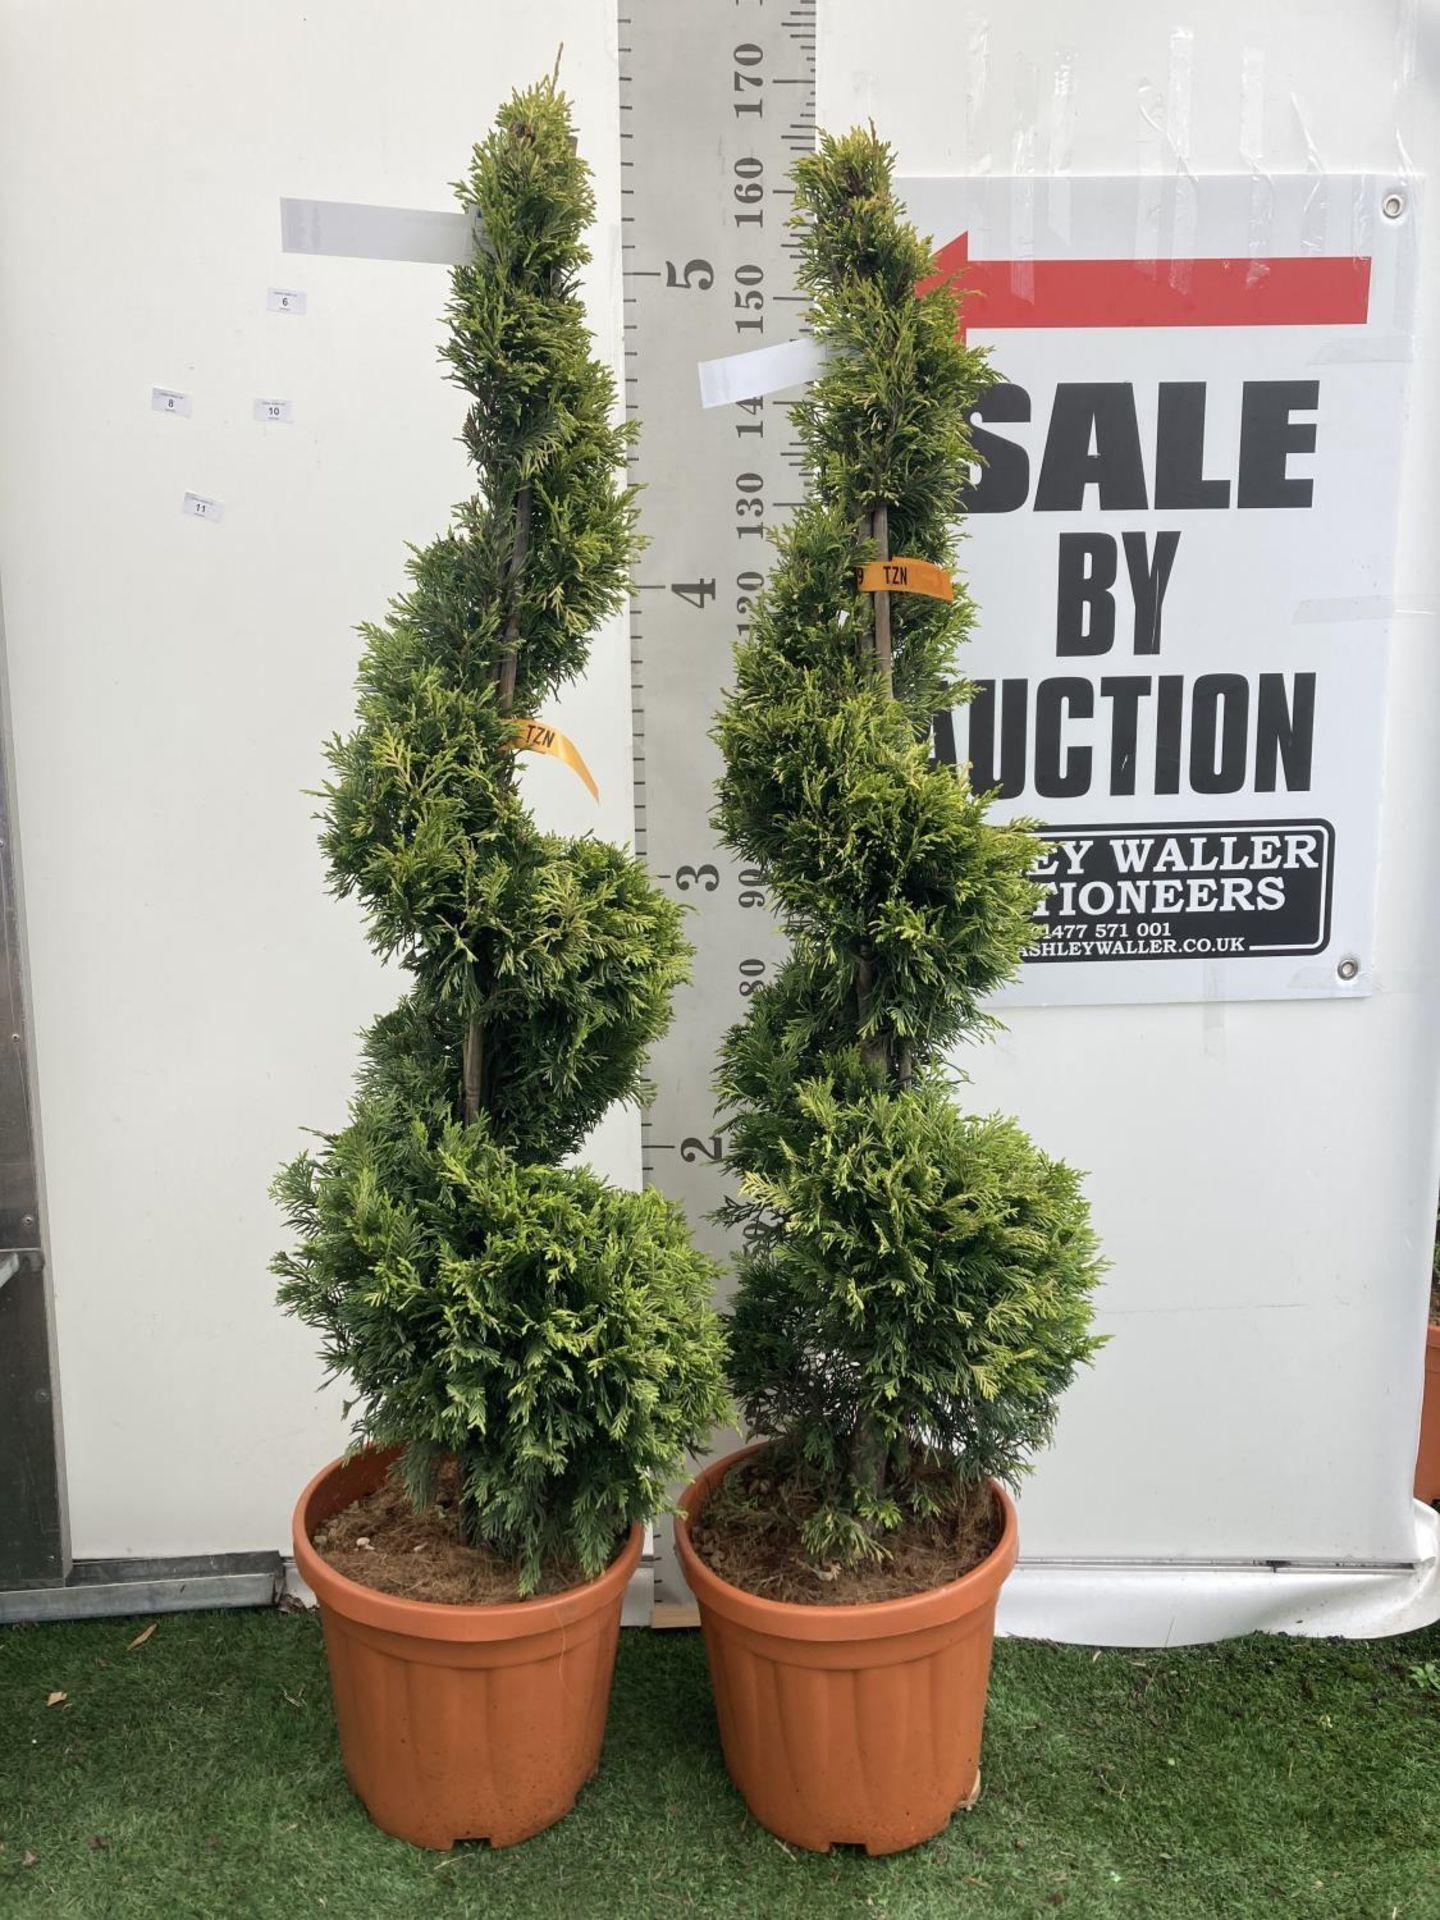 TWO SPIRAL CUPRESSOCYPARIS LEYLANDII 'GOLD RIDER' OVER 150CM IN HEIGHT IN 15LTR POTS TO BE SOLD